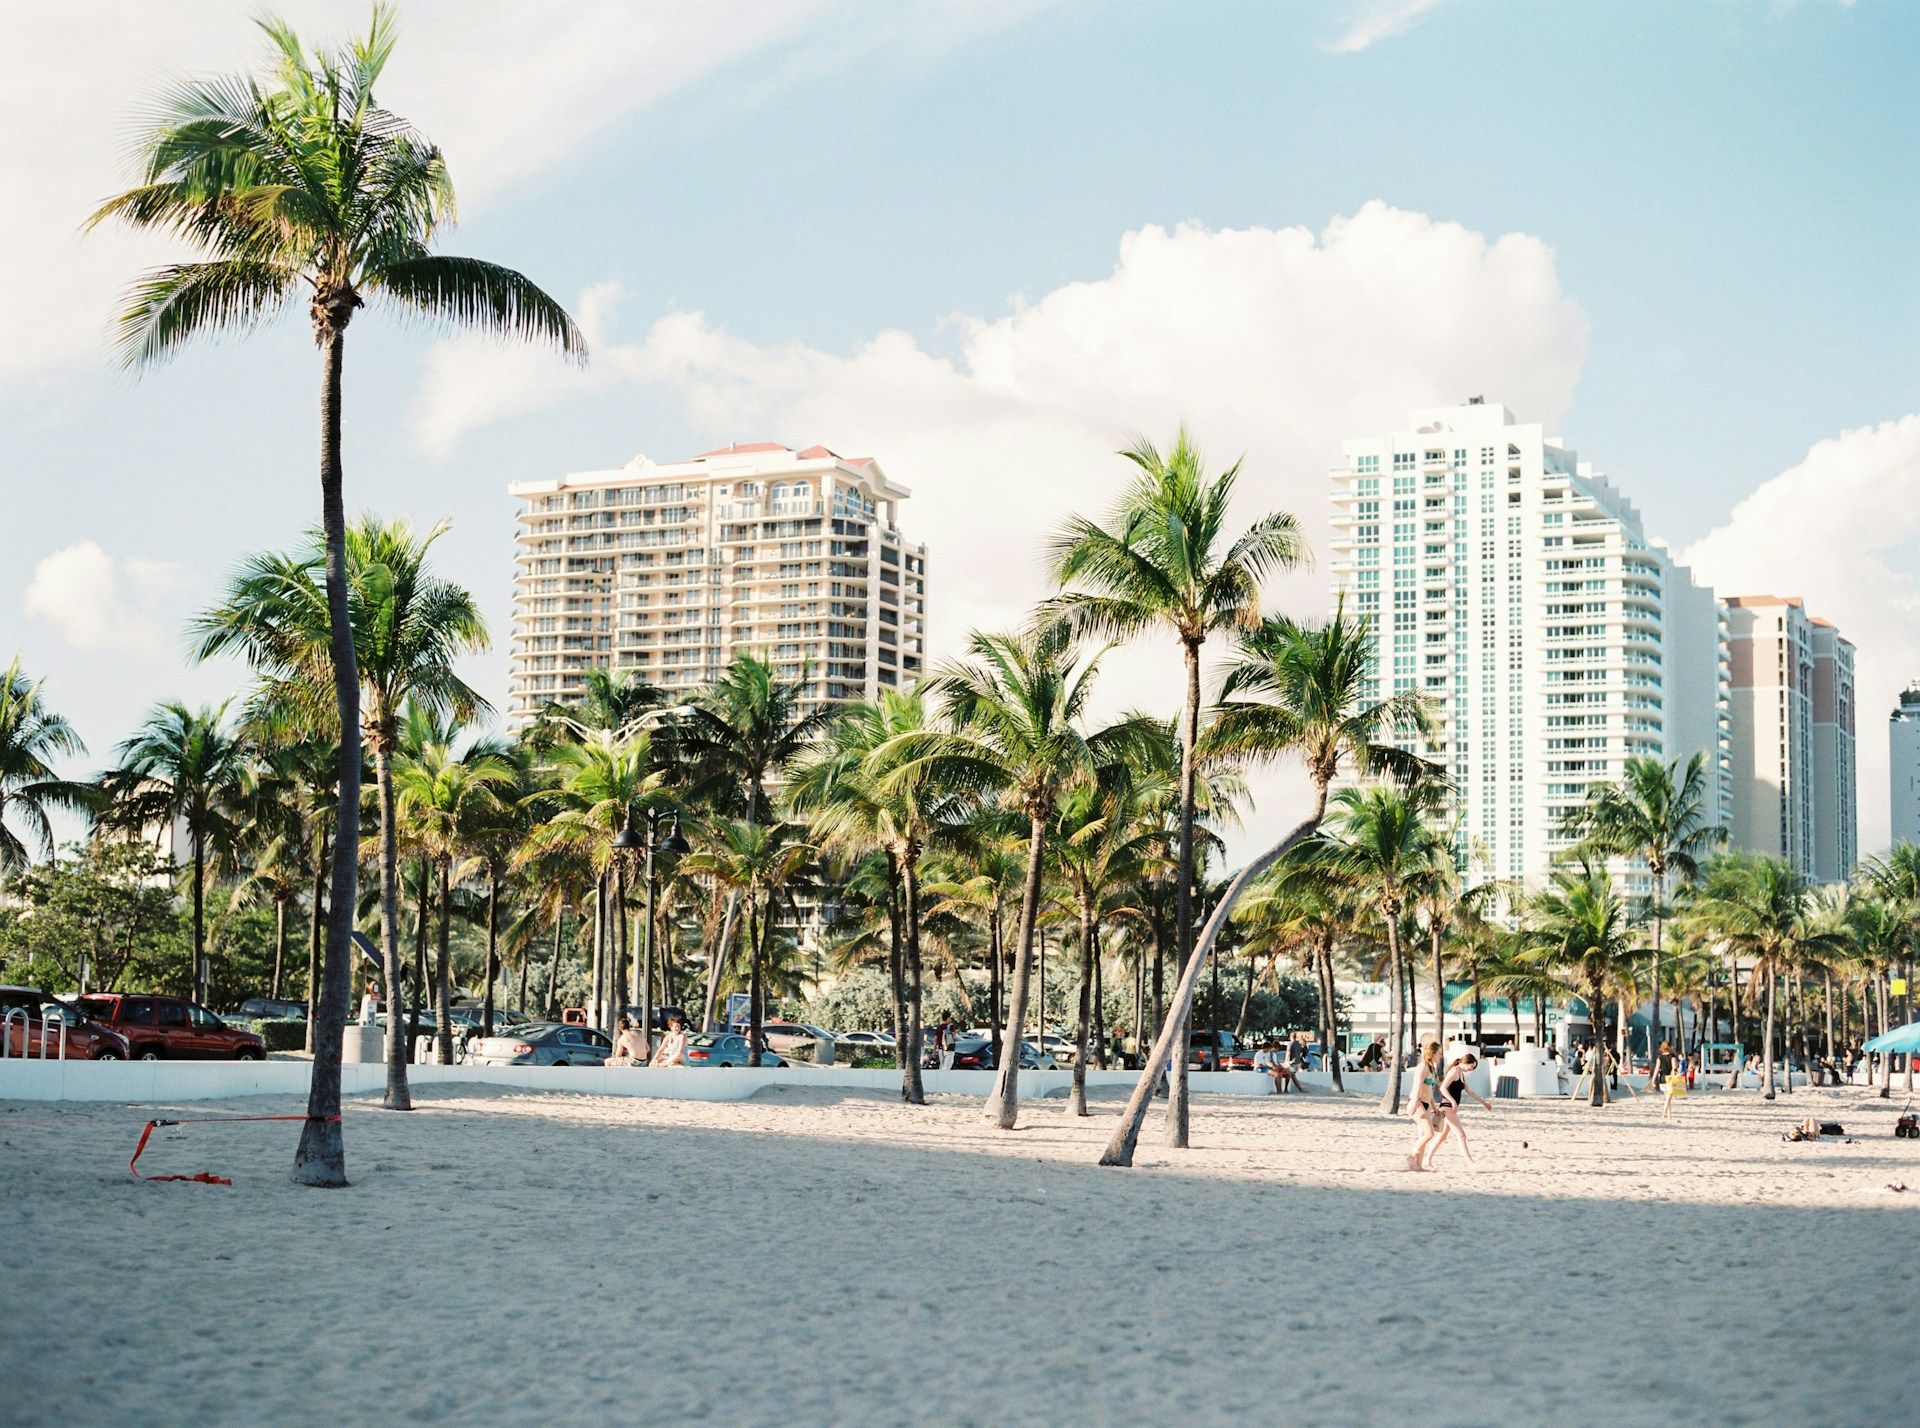 Palm trees on a beach in Miami